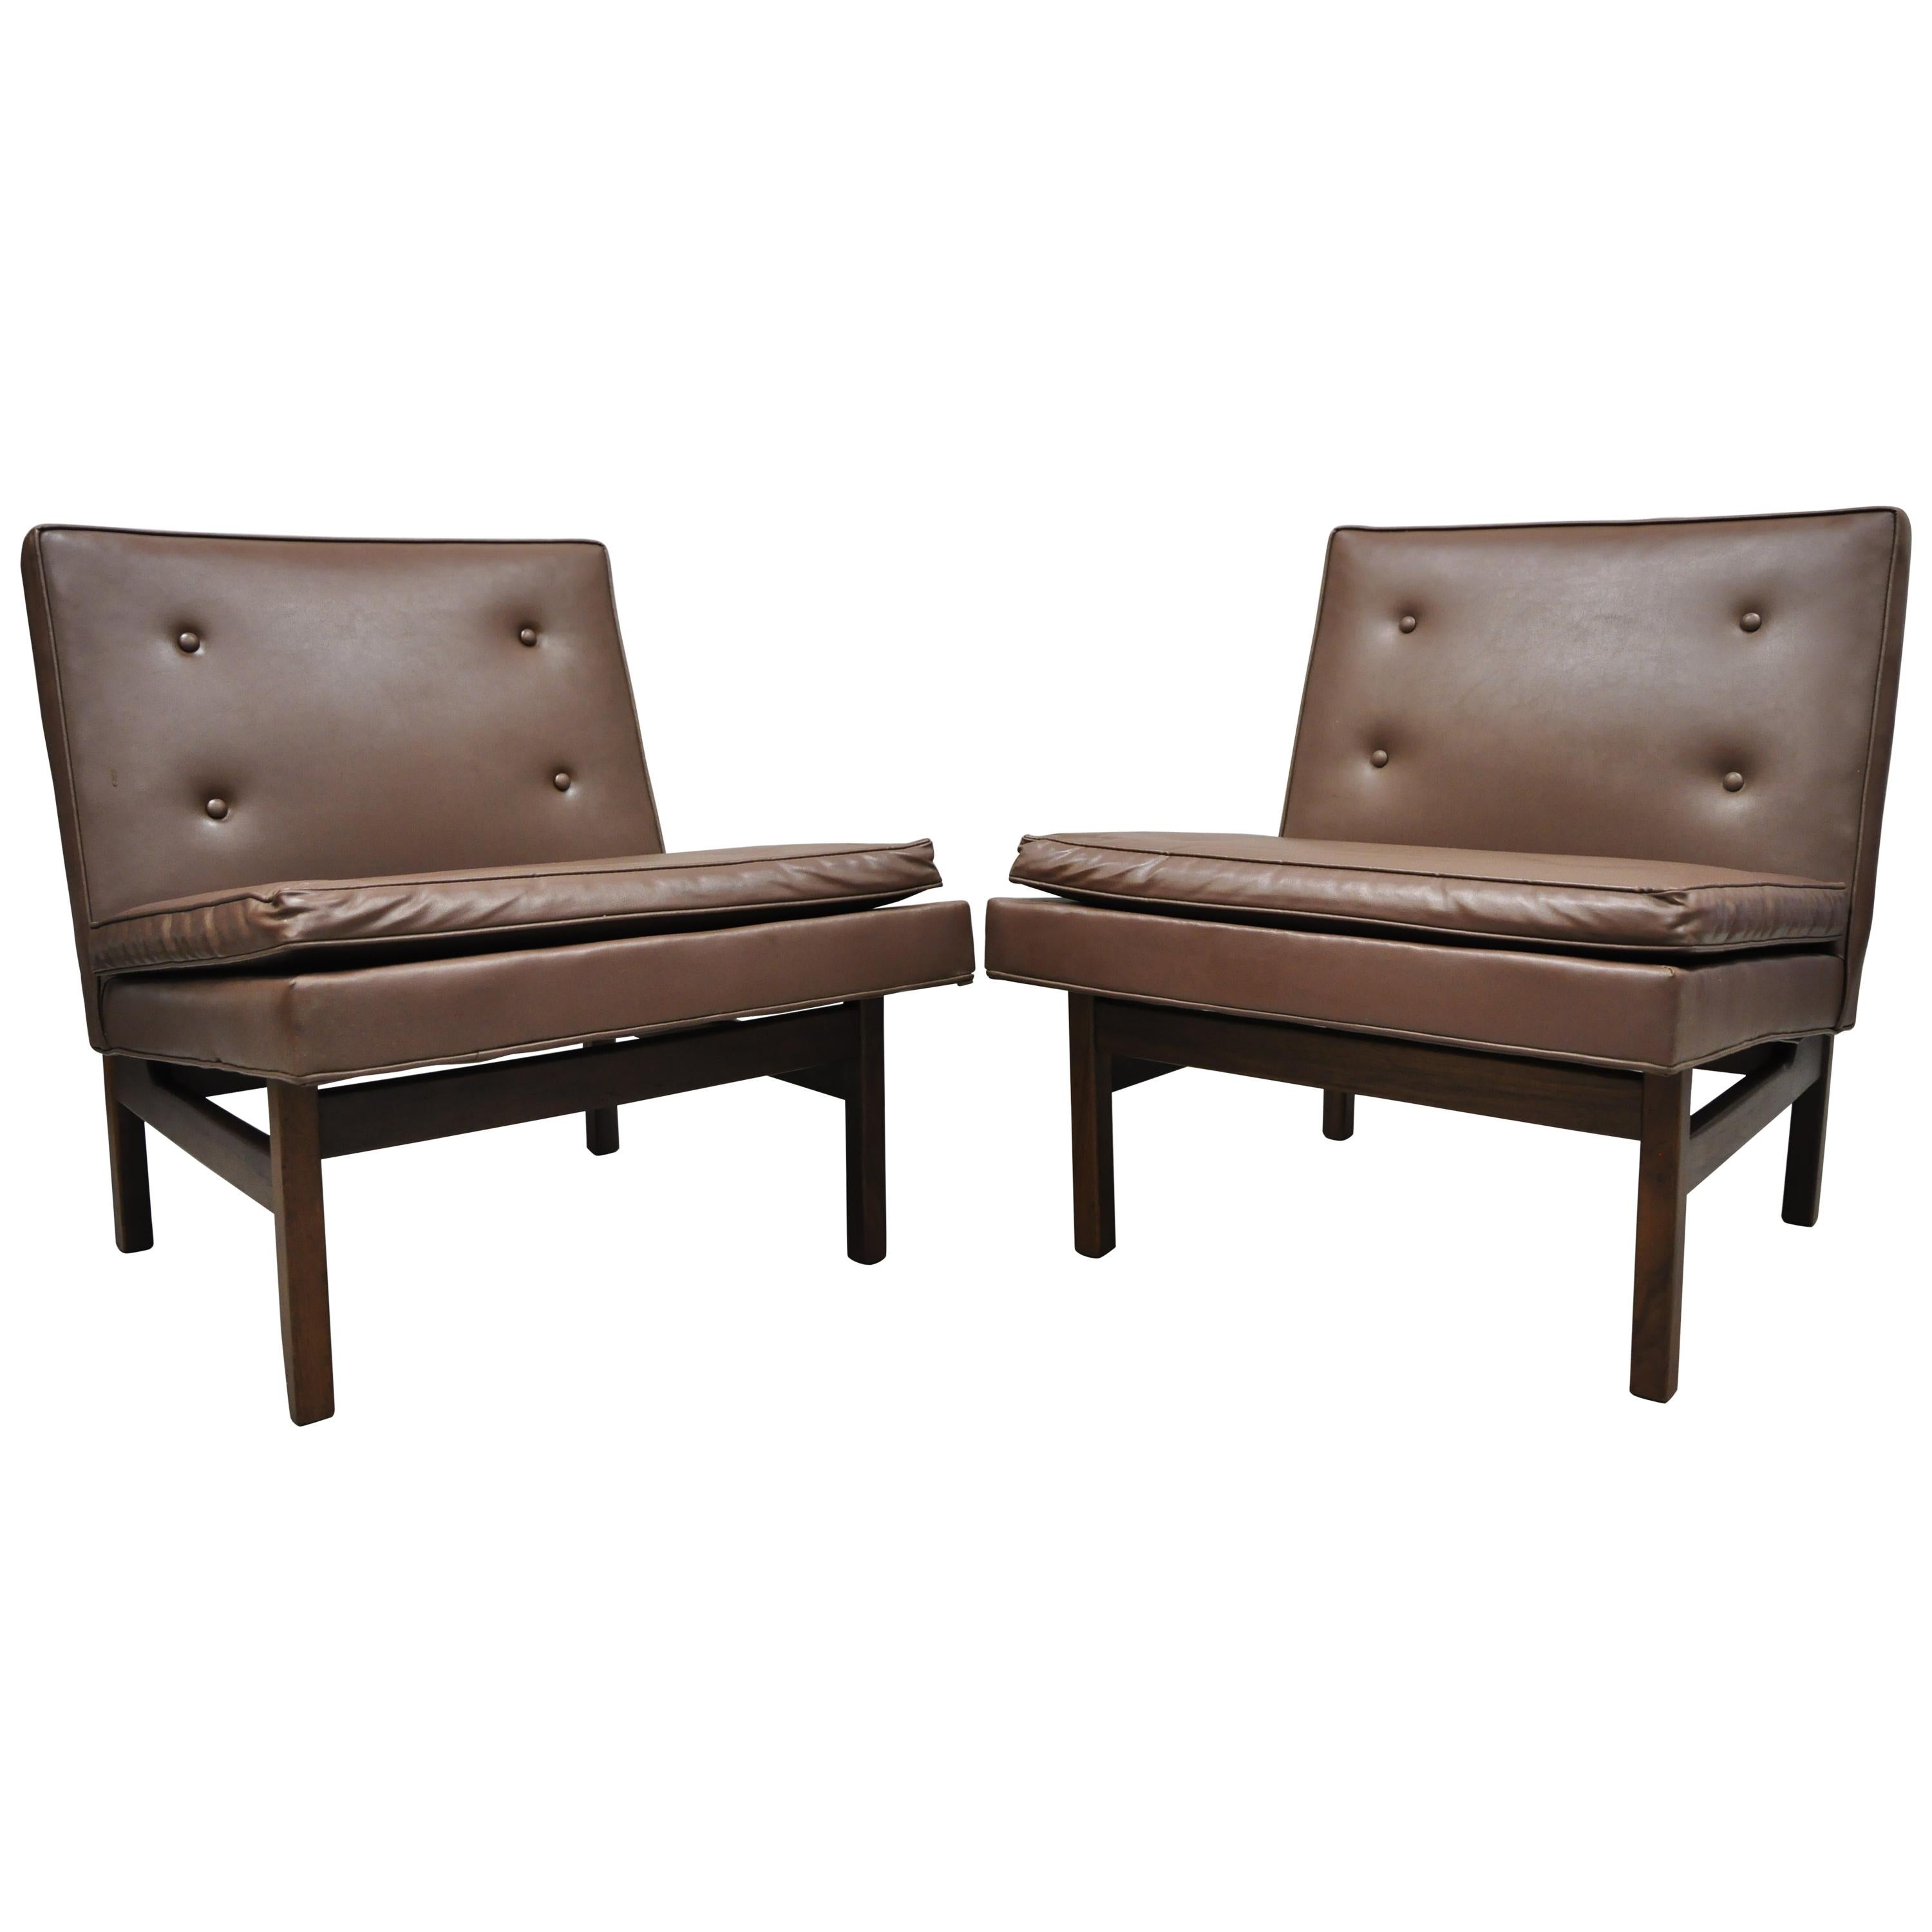 Pair of Milo Baughman for Thayer Coggin Teak and Vinyl Slipper Lounge Chairs For Sale